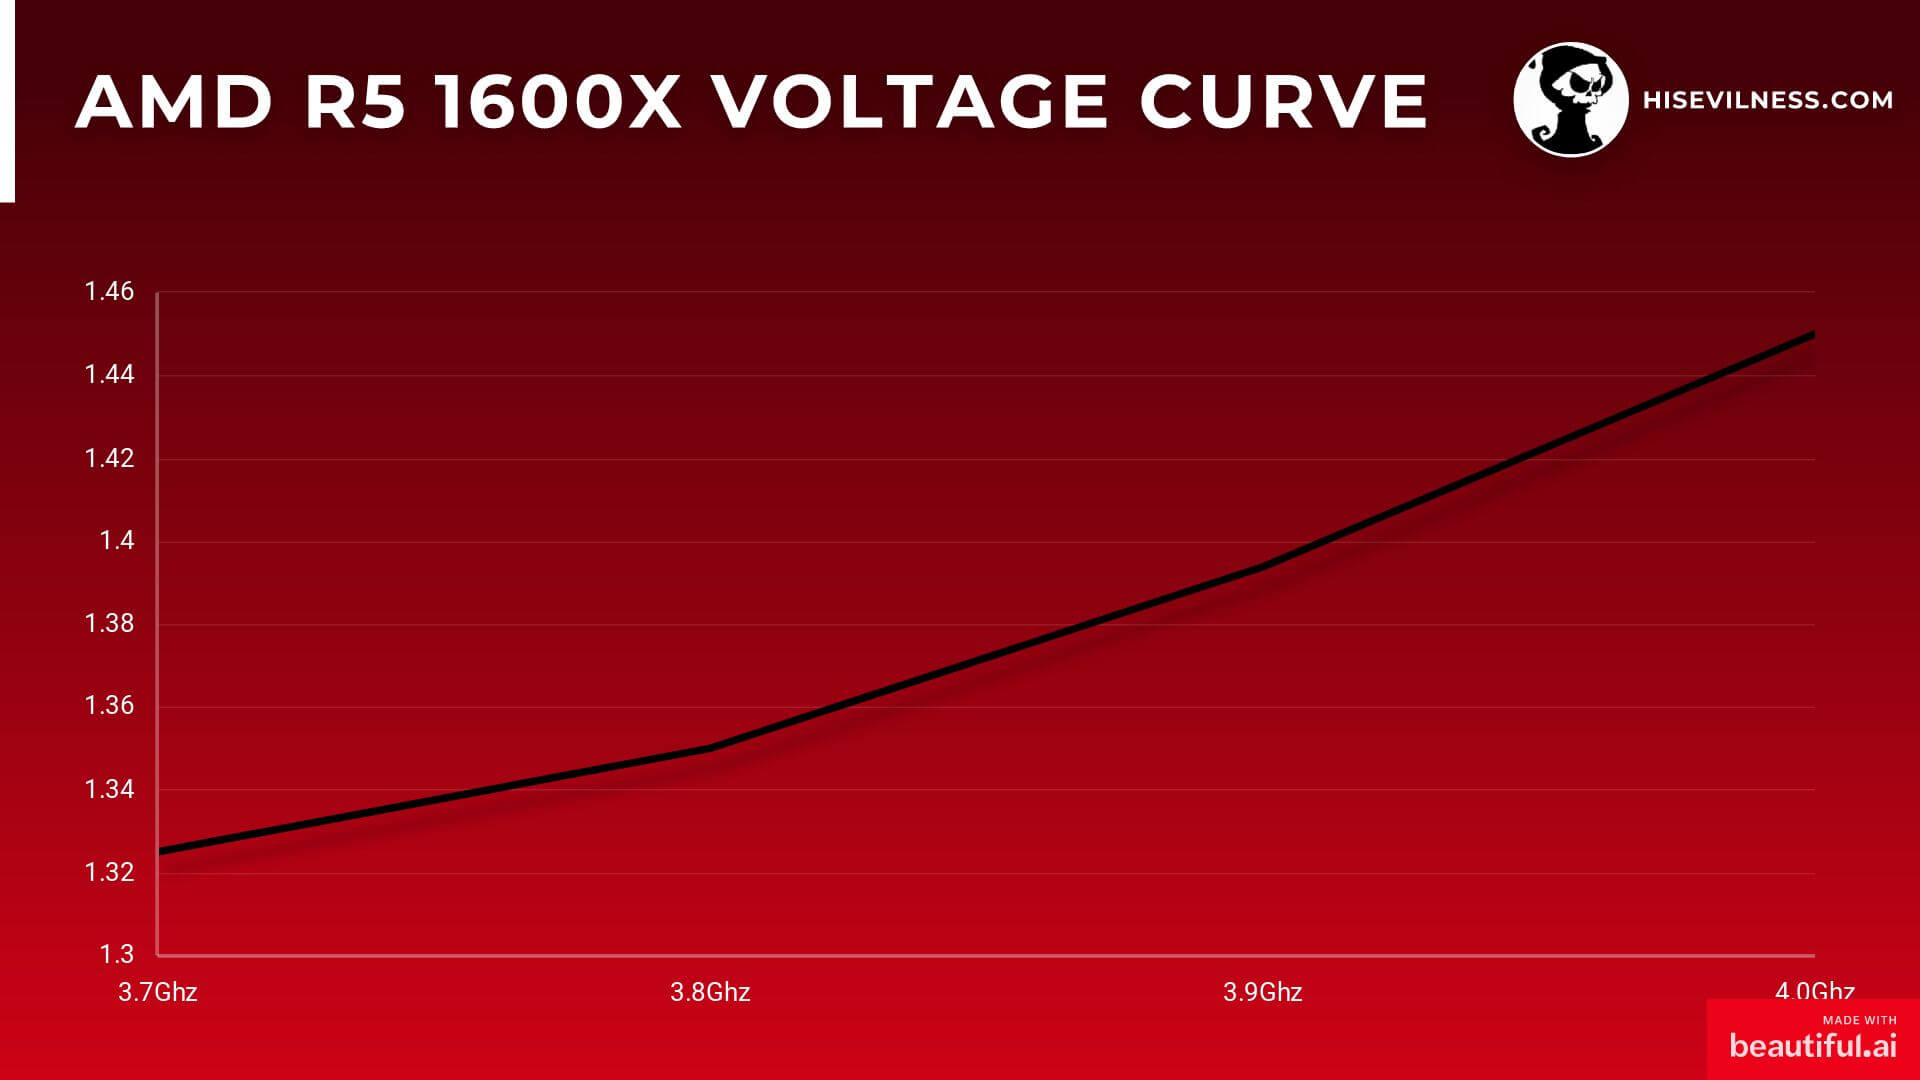 Voltage curve from 3.7Ghz to 4.0Ghz